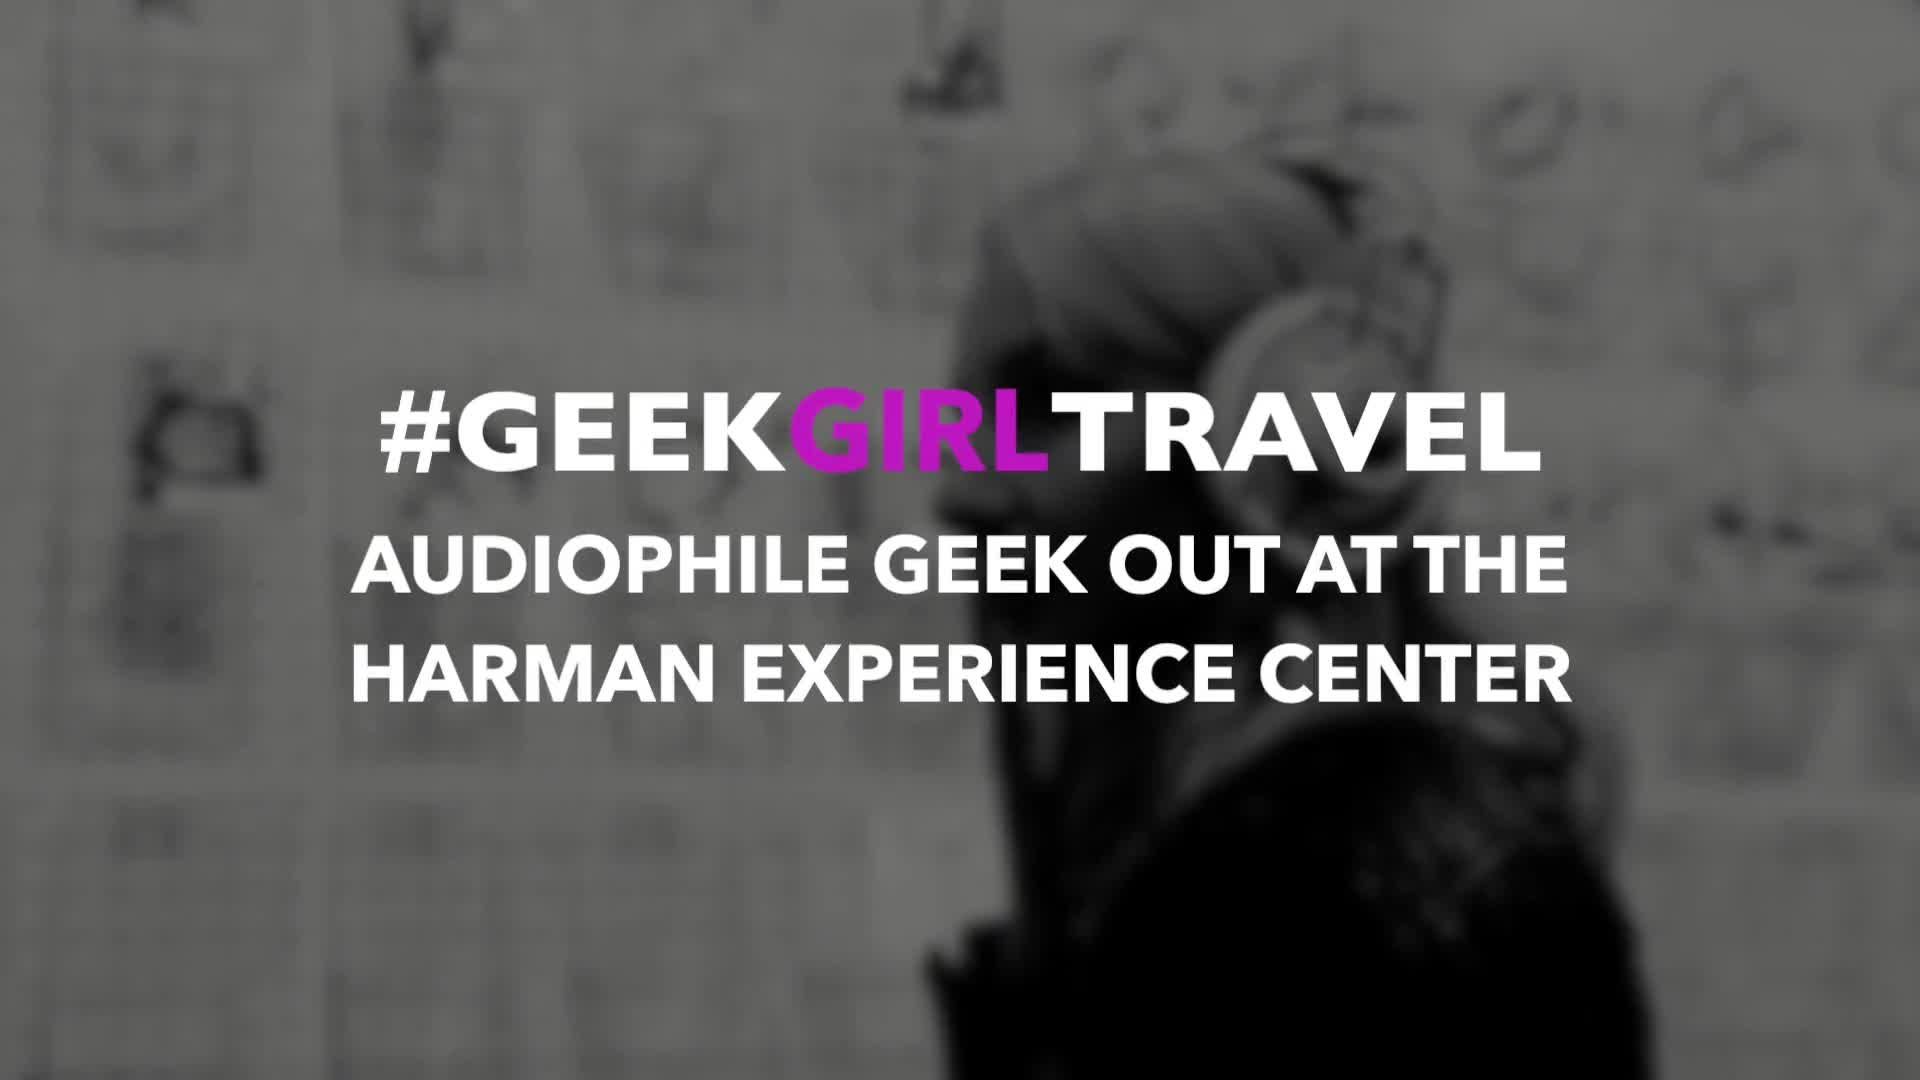 GeekGirl Geek Out: Touring the Harman Experience Center